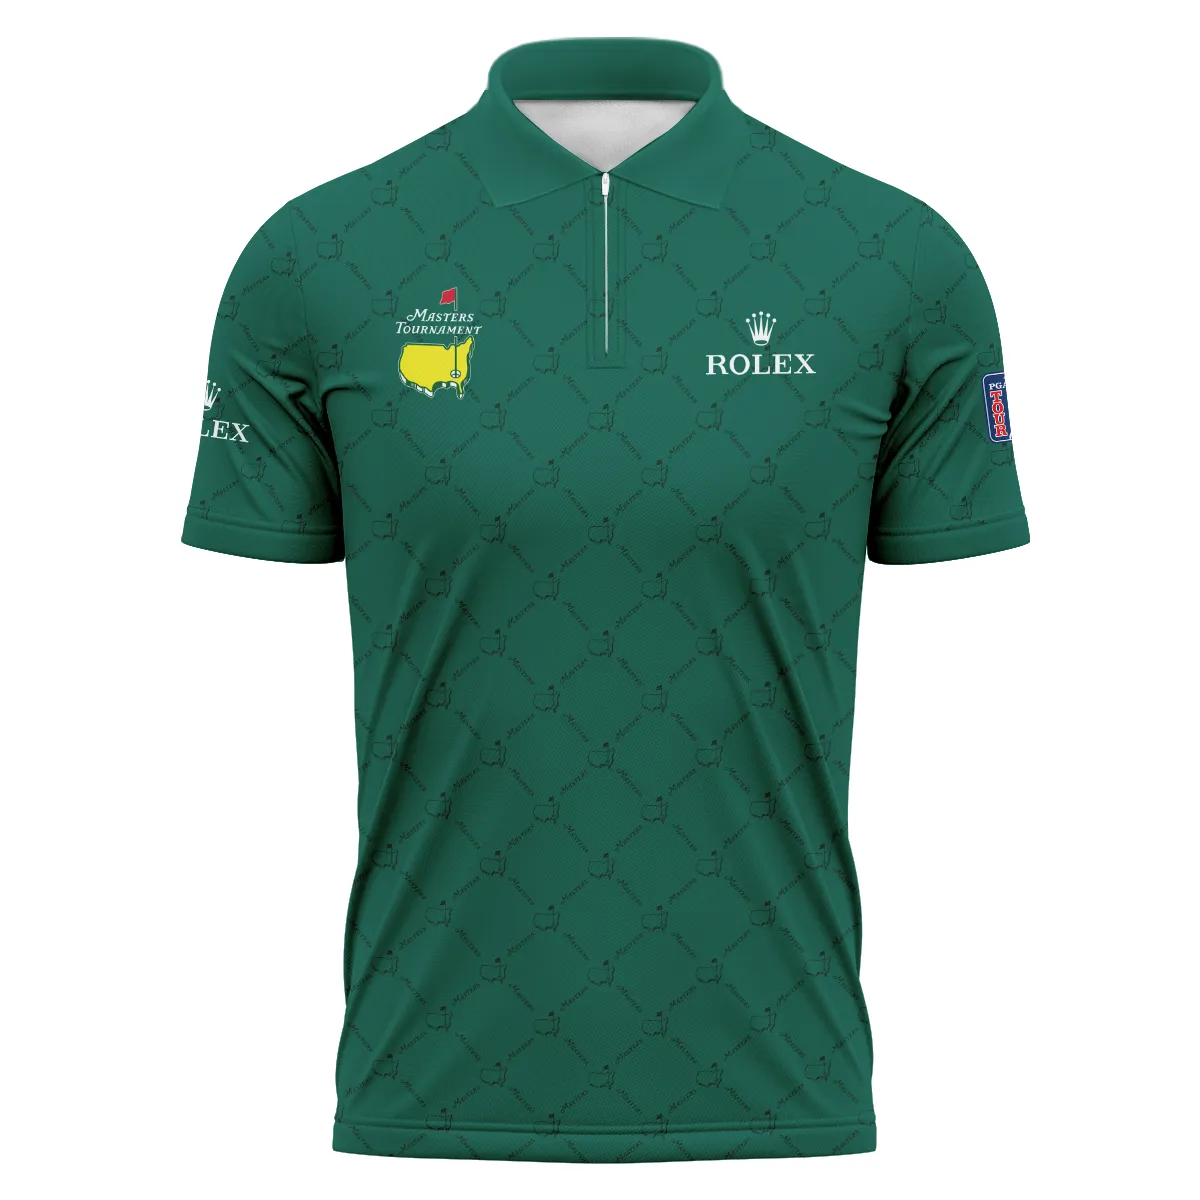 Golf Sport Pattern Color Green Mix Black Masters Tournament Rolex Polo Shirt Style Classic